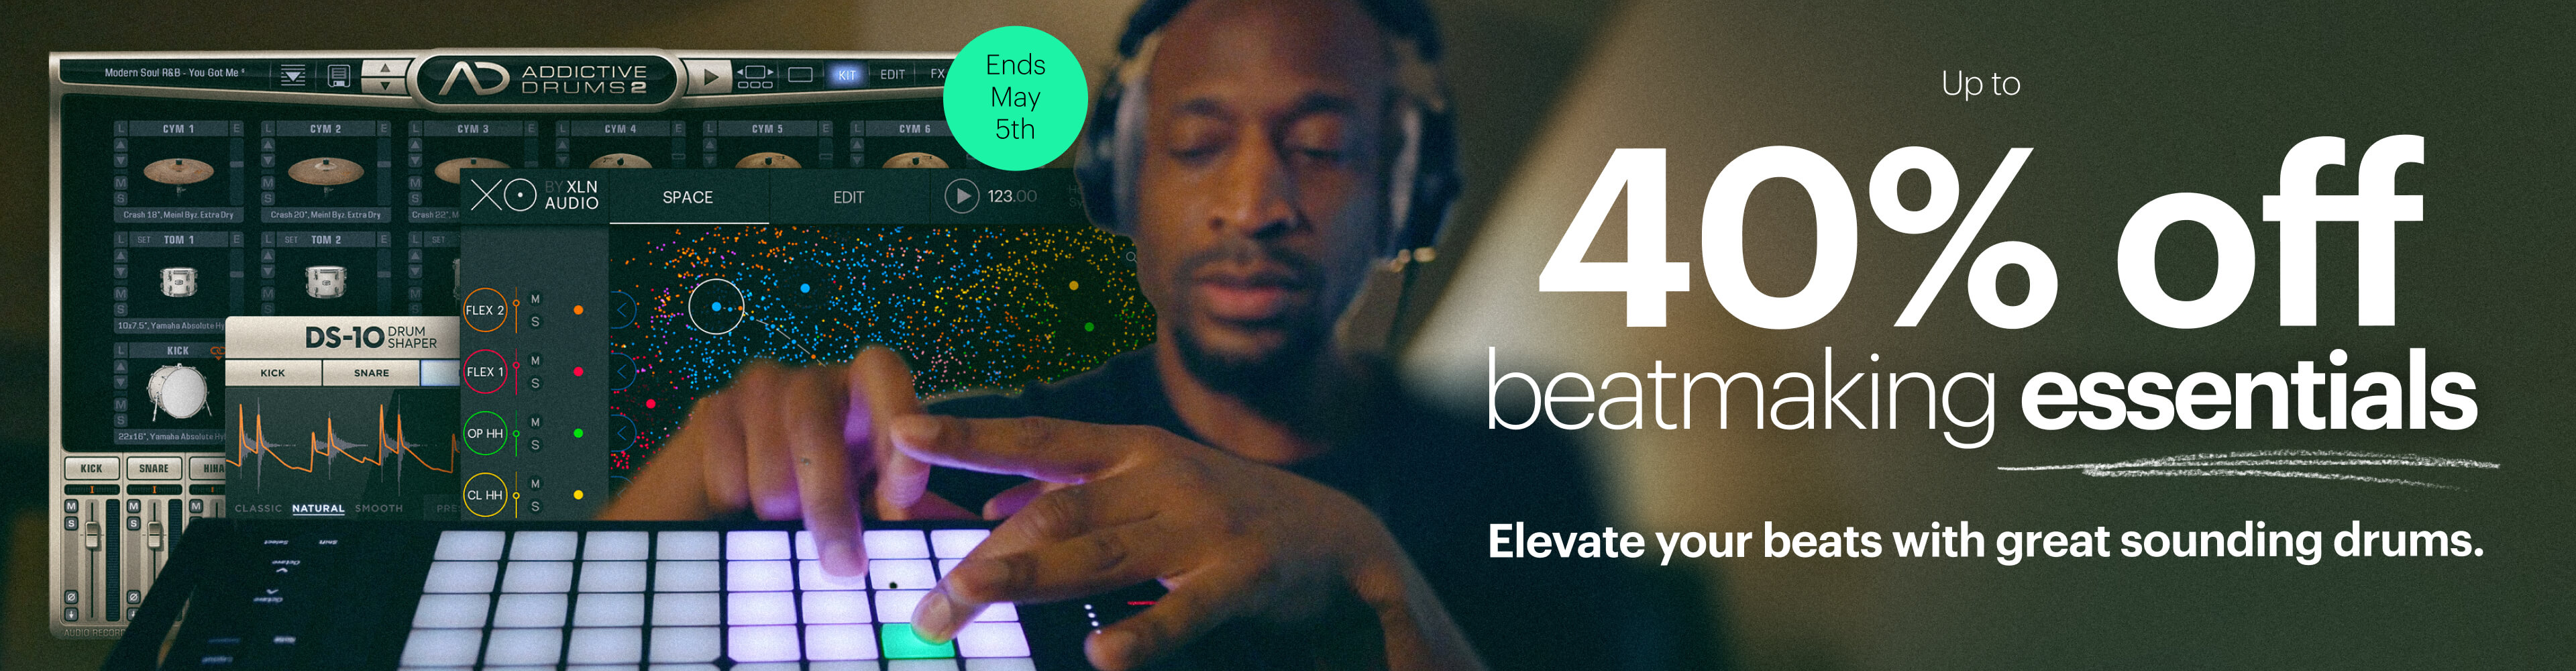 Up to 40% off beatmaking essentials. Ends May 5th.